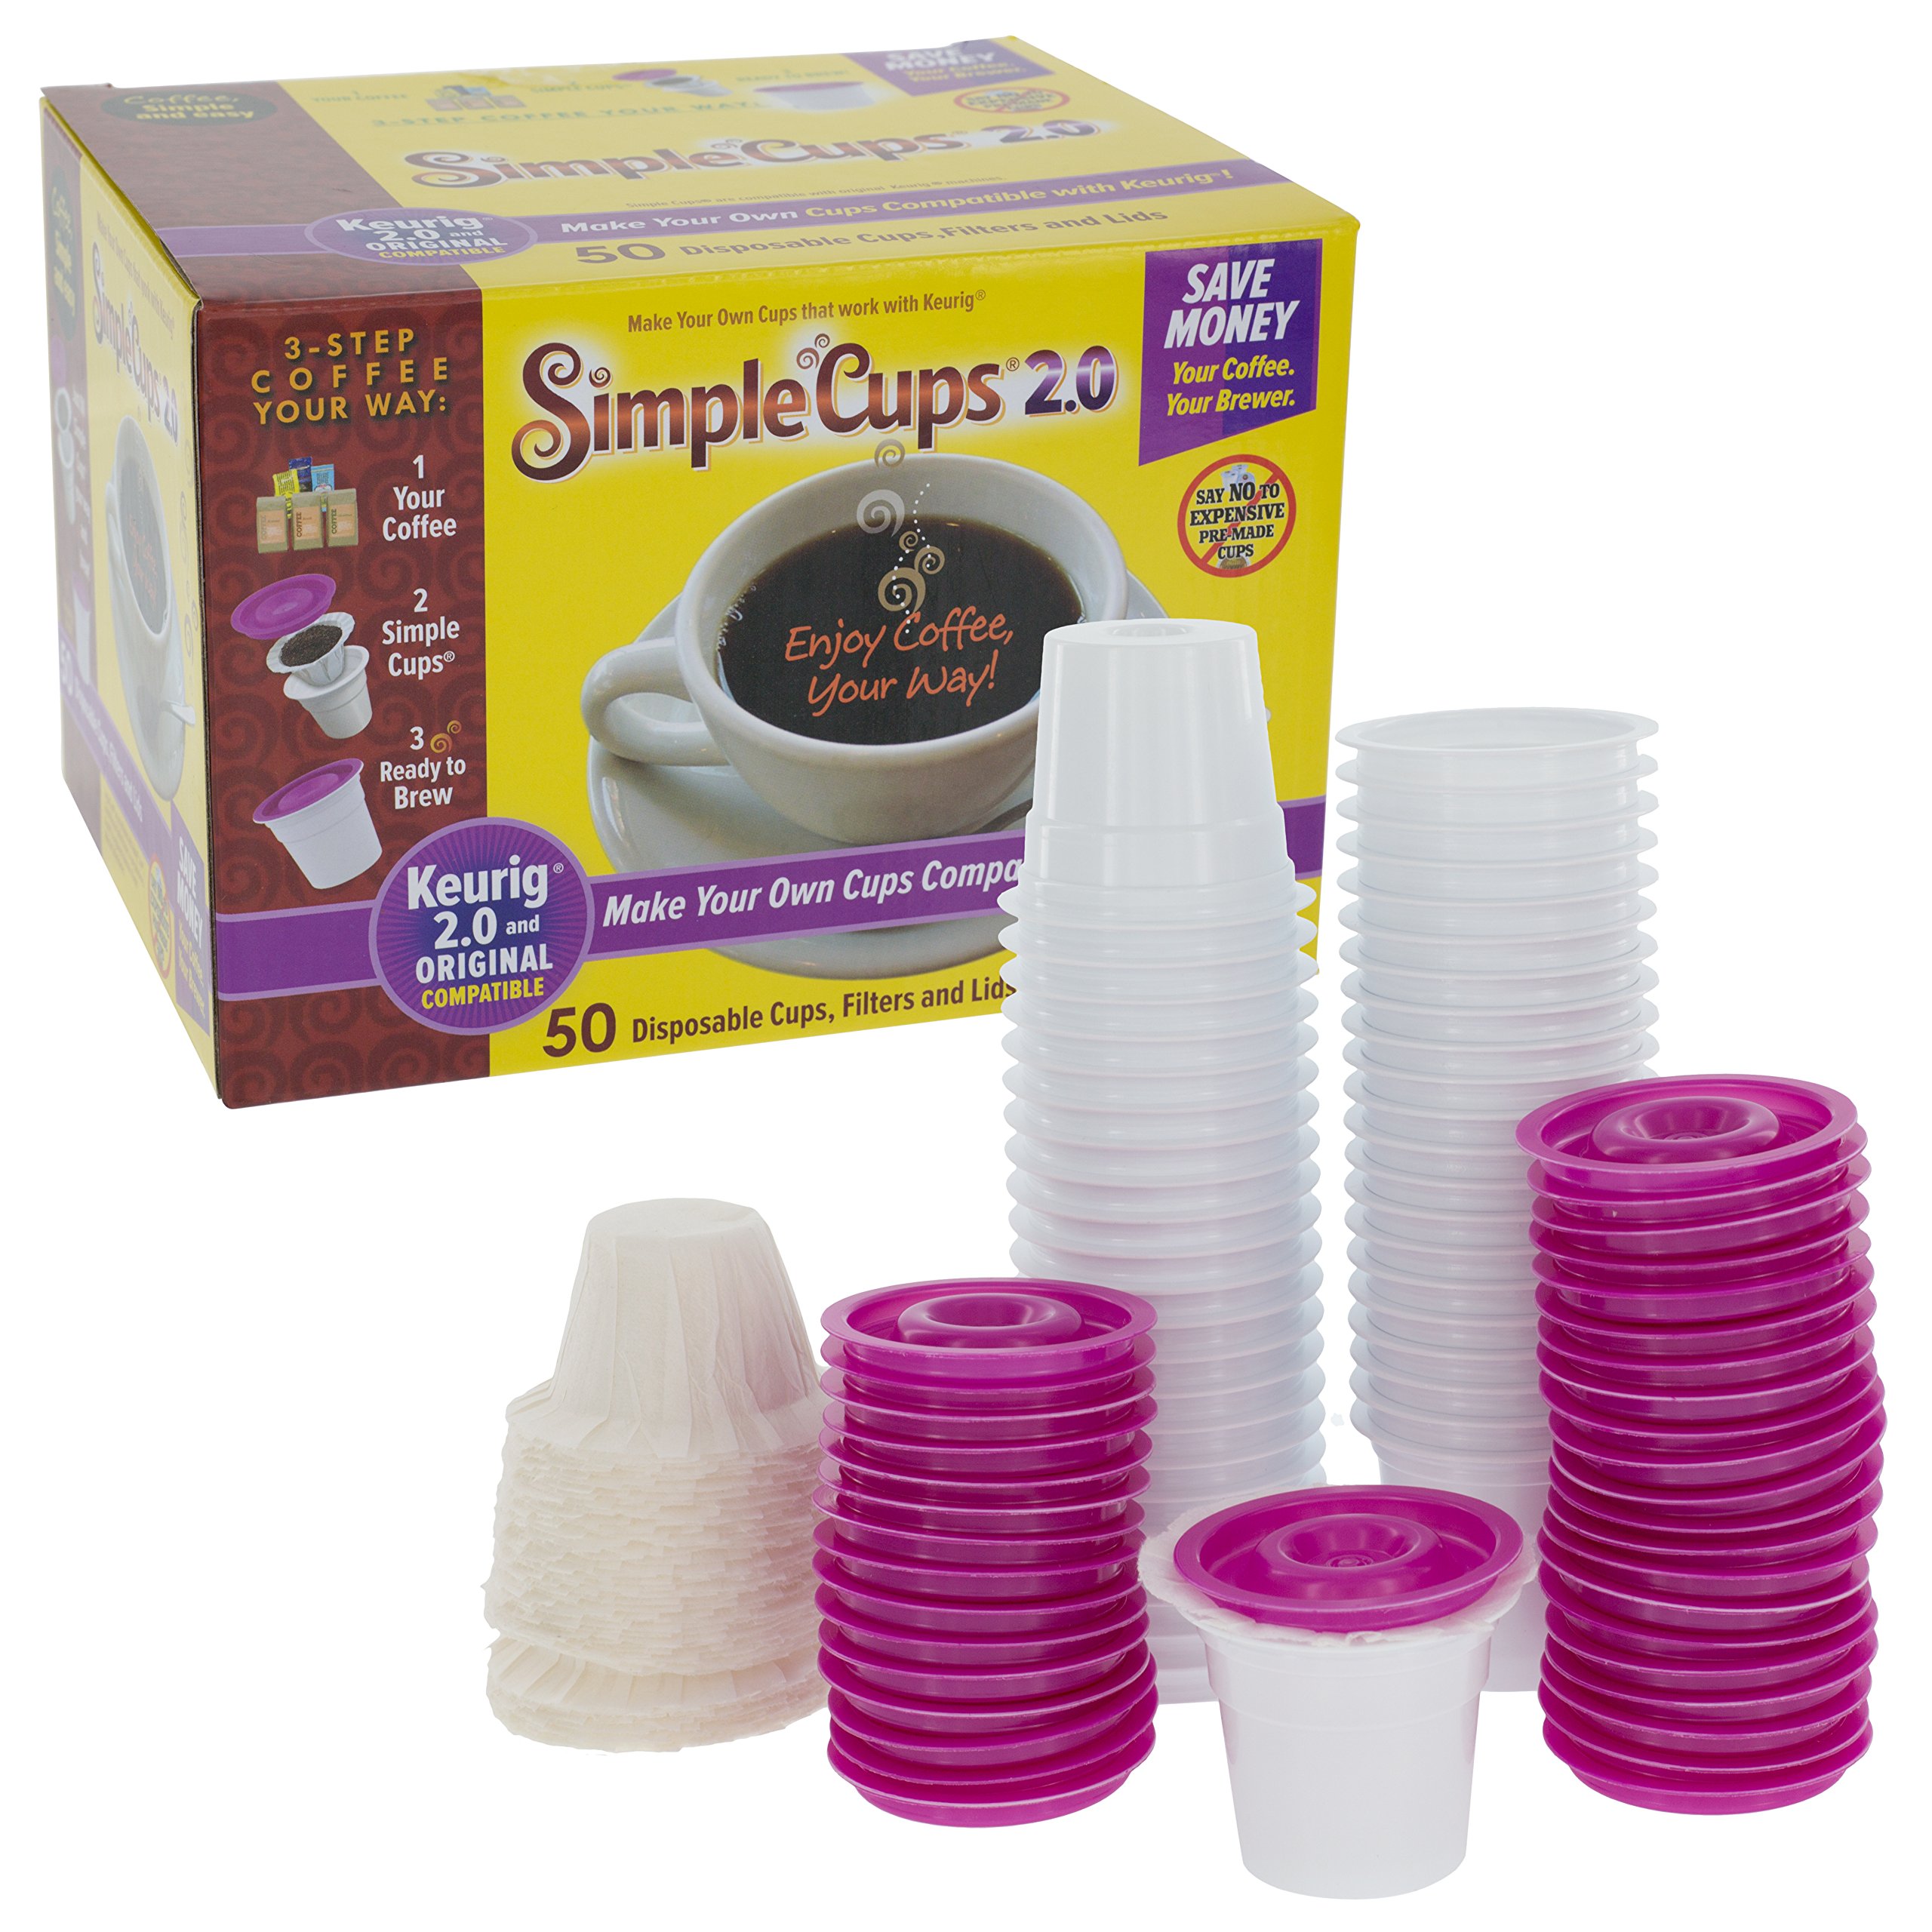 Book Cover Disposable Cups for Use in Keurig 2.0 Brewers - 50-2.0 Cups, Lids, and Filters - Use Your Own Coffee in 2.0 K-Cups